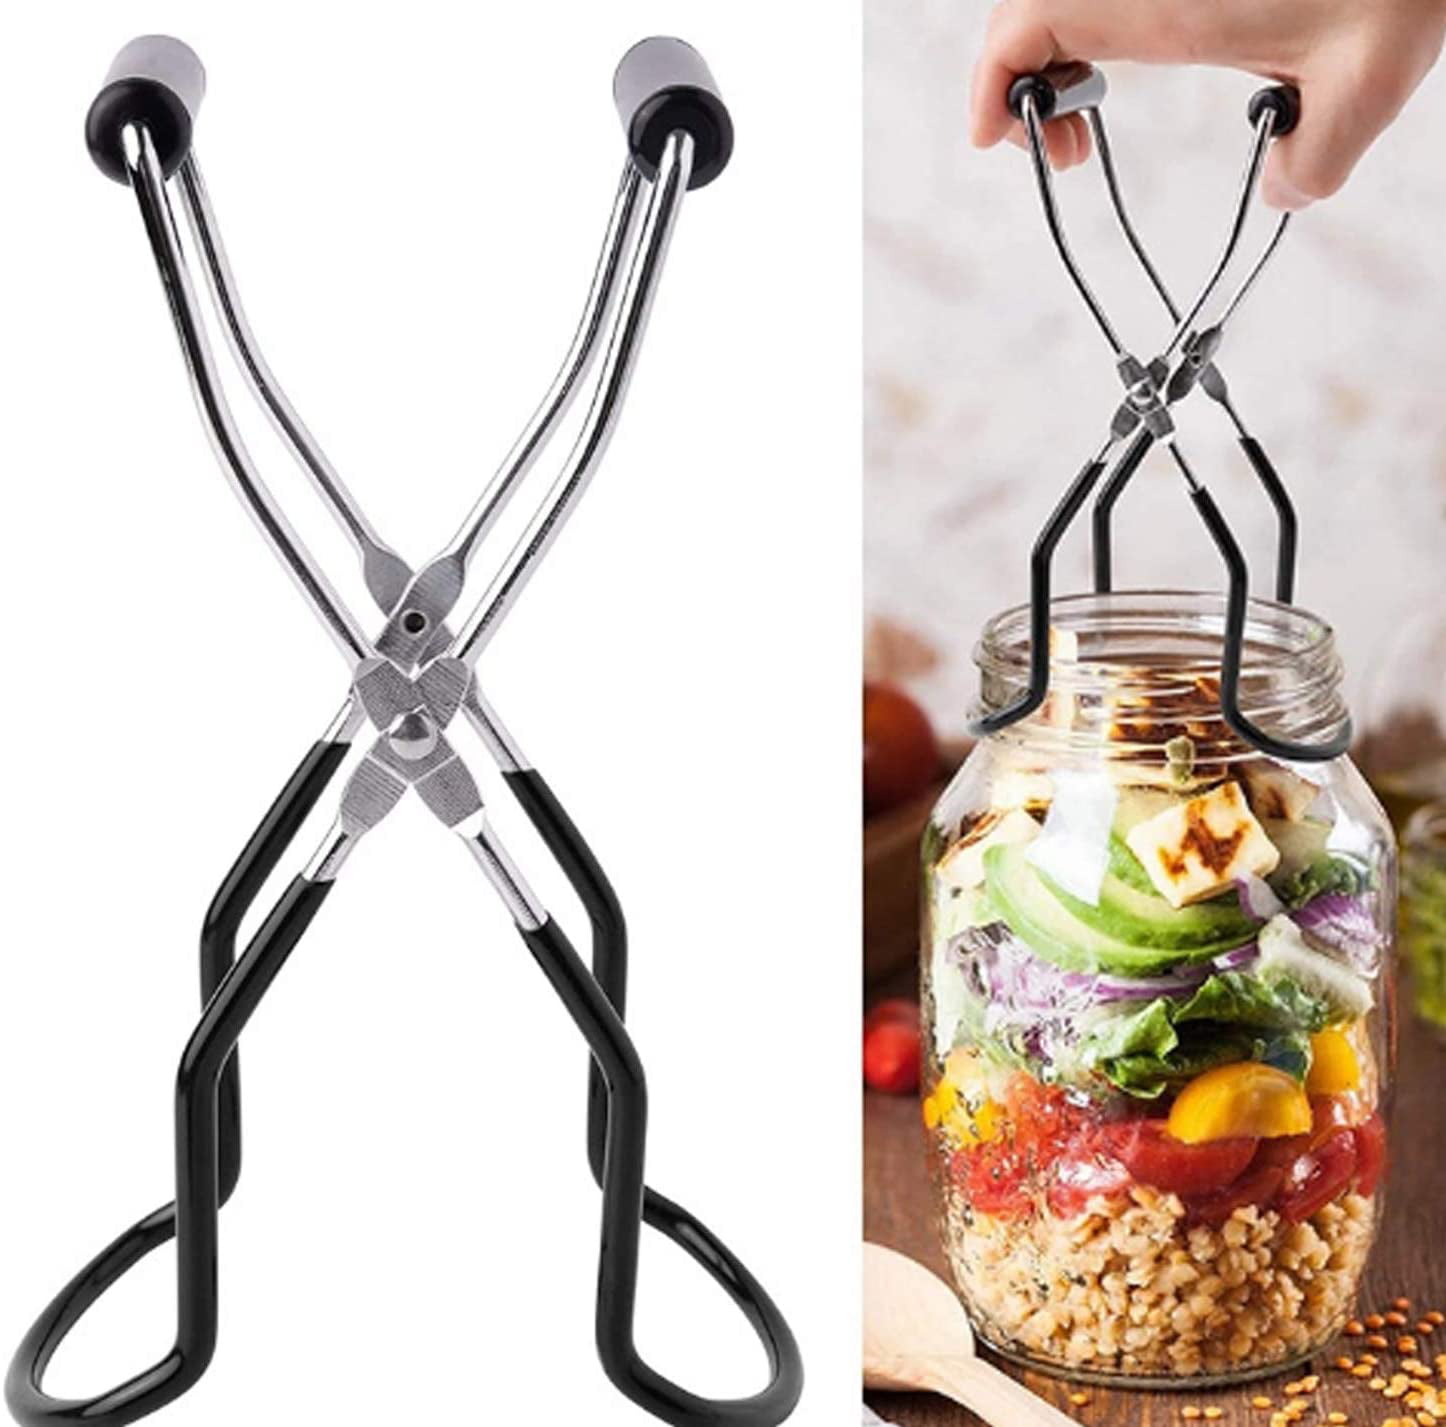 2 Pieces Canning Jar Lifter Tongs Stainless Steel Jar Lifter with Grip Handle for Safe and Secure Grip Green 